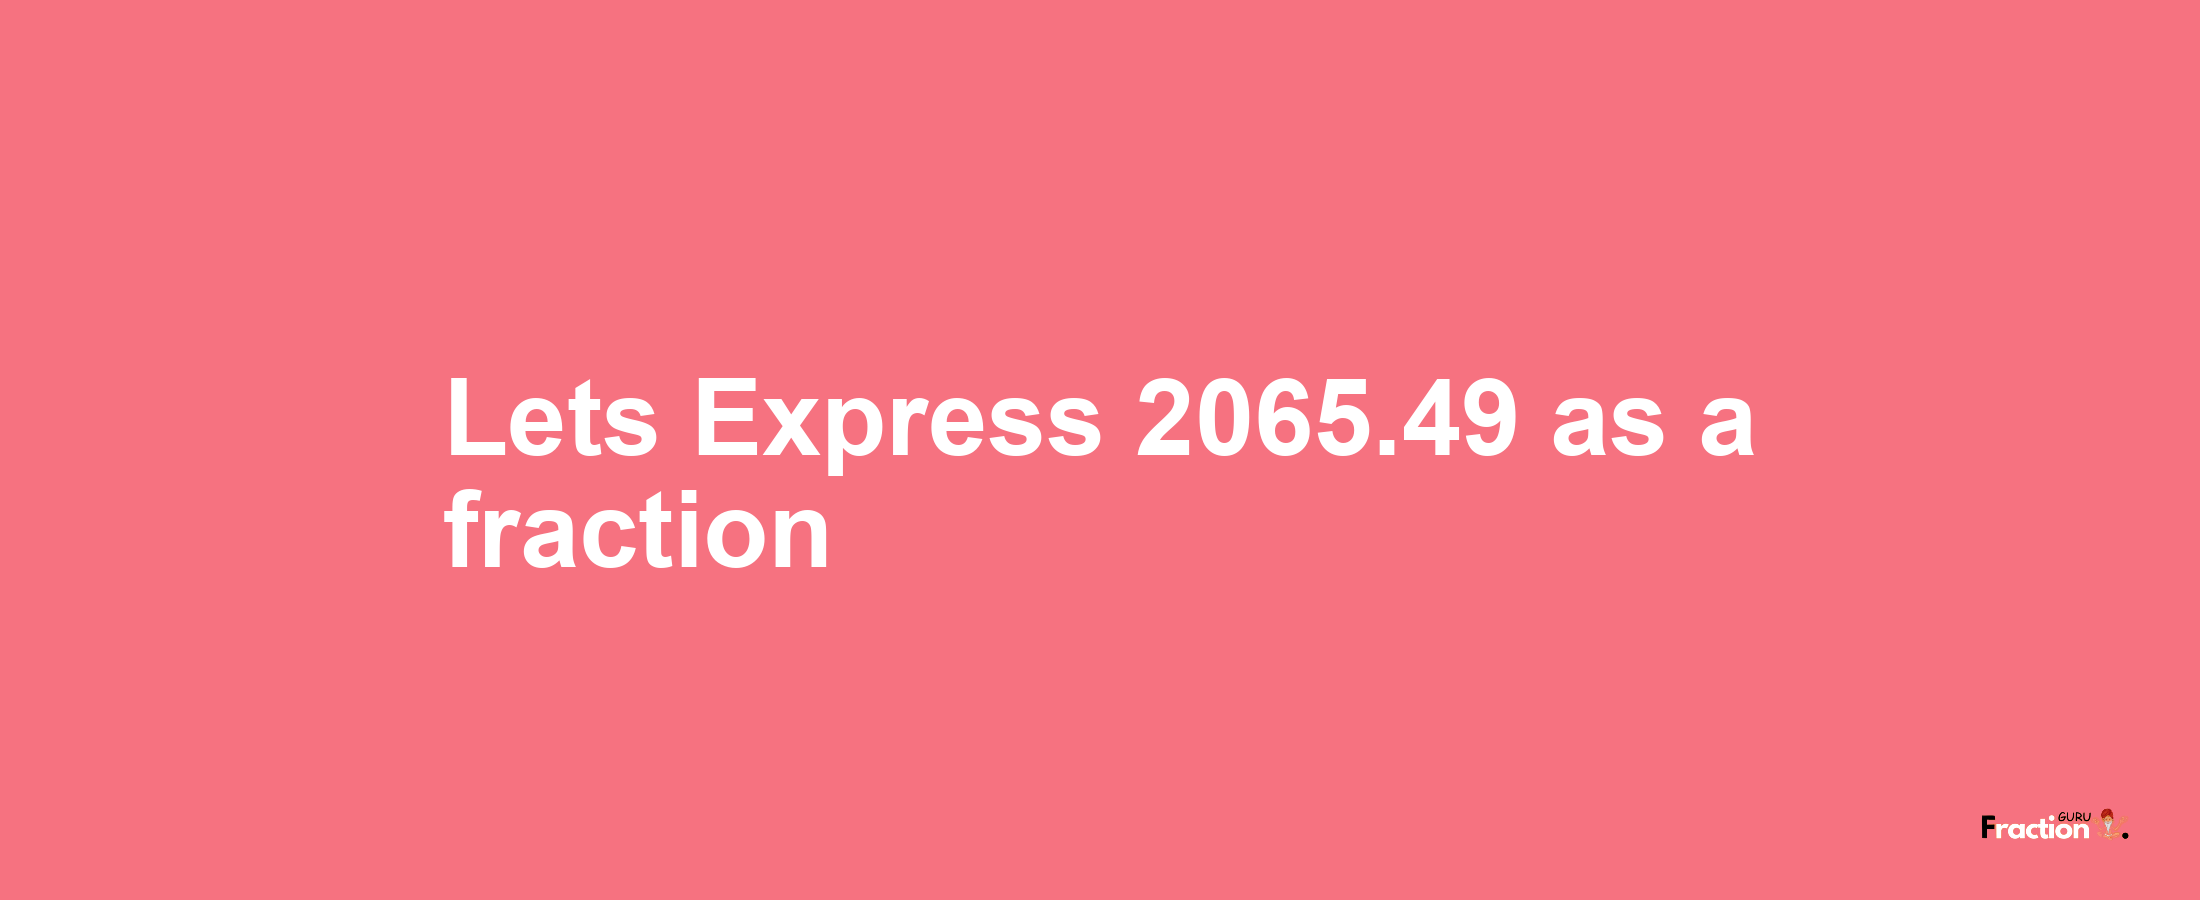 Lets Express 2065.49 as afraction